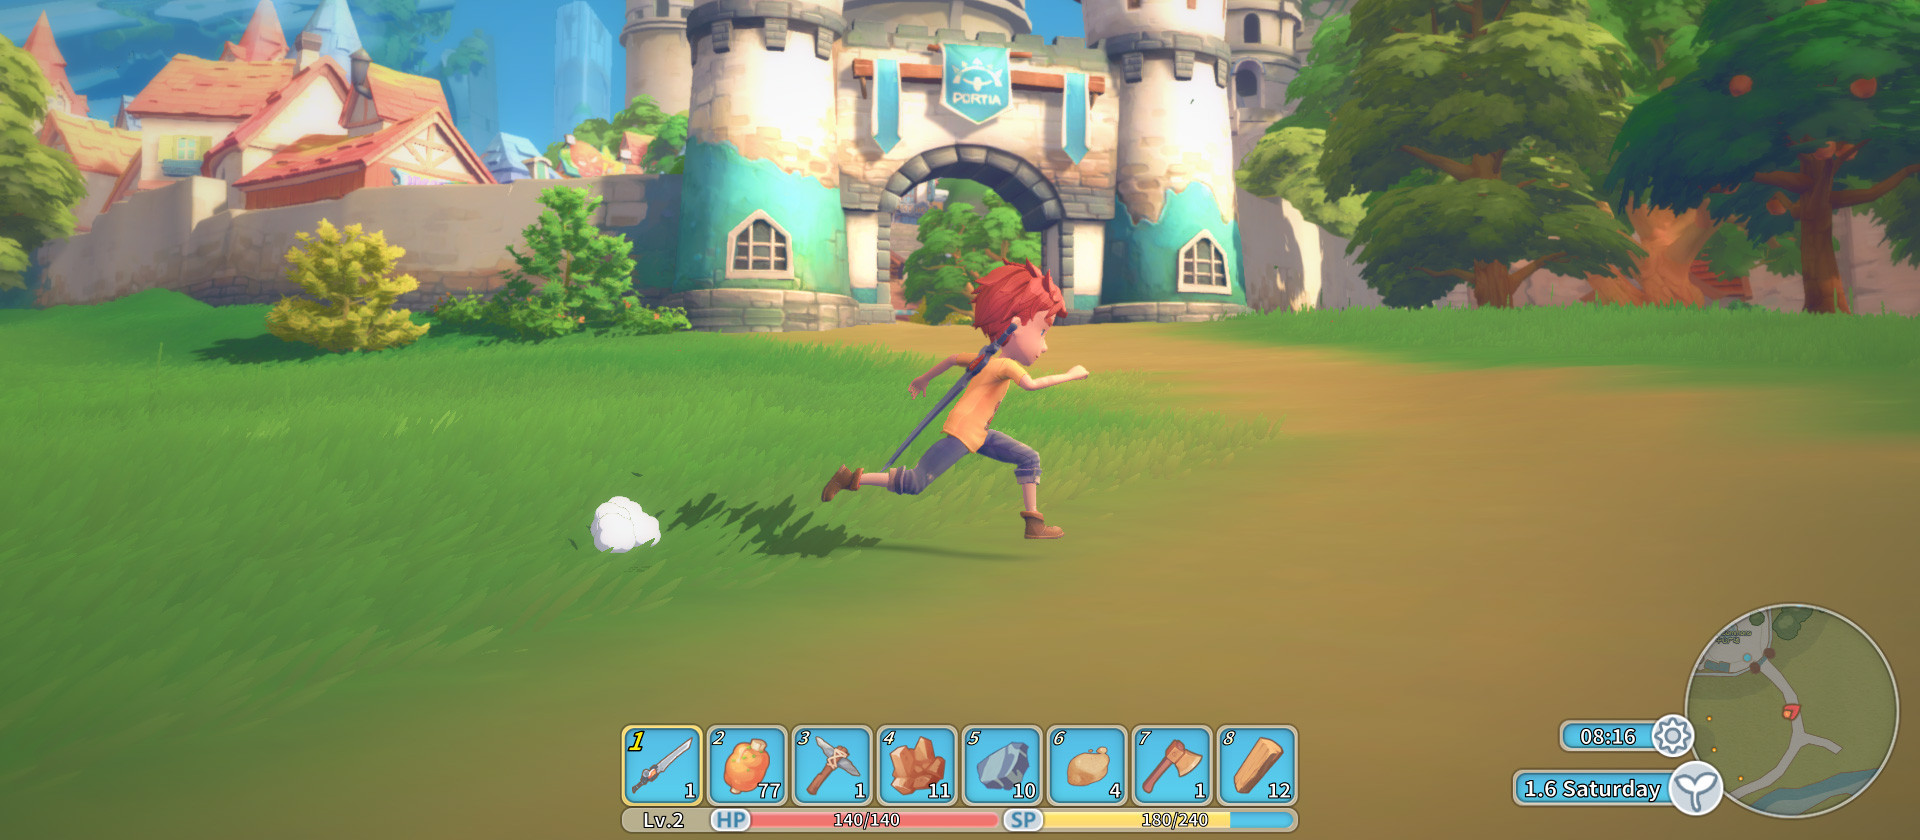 My Time at Portia